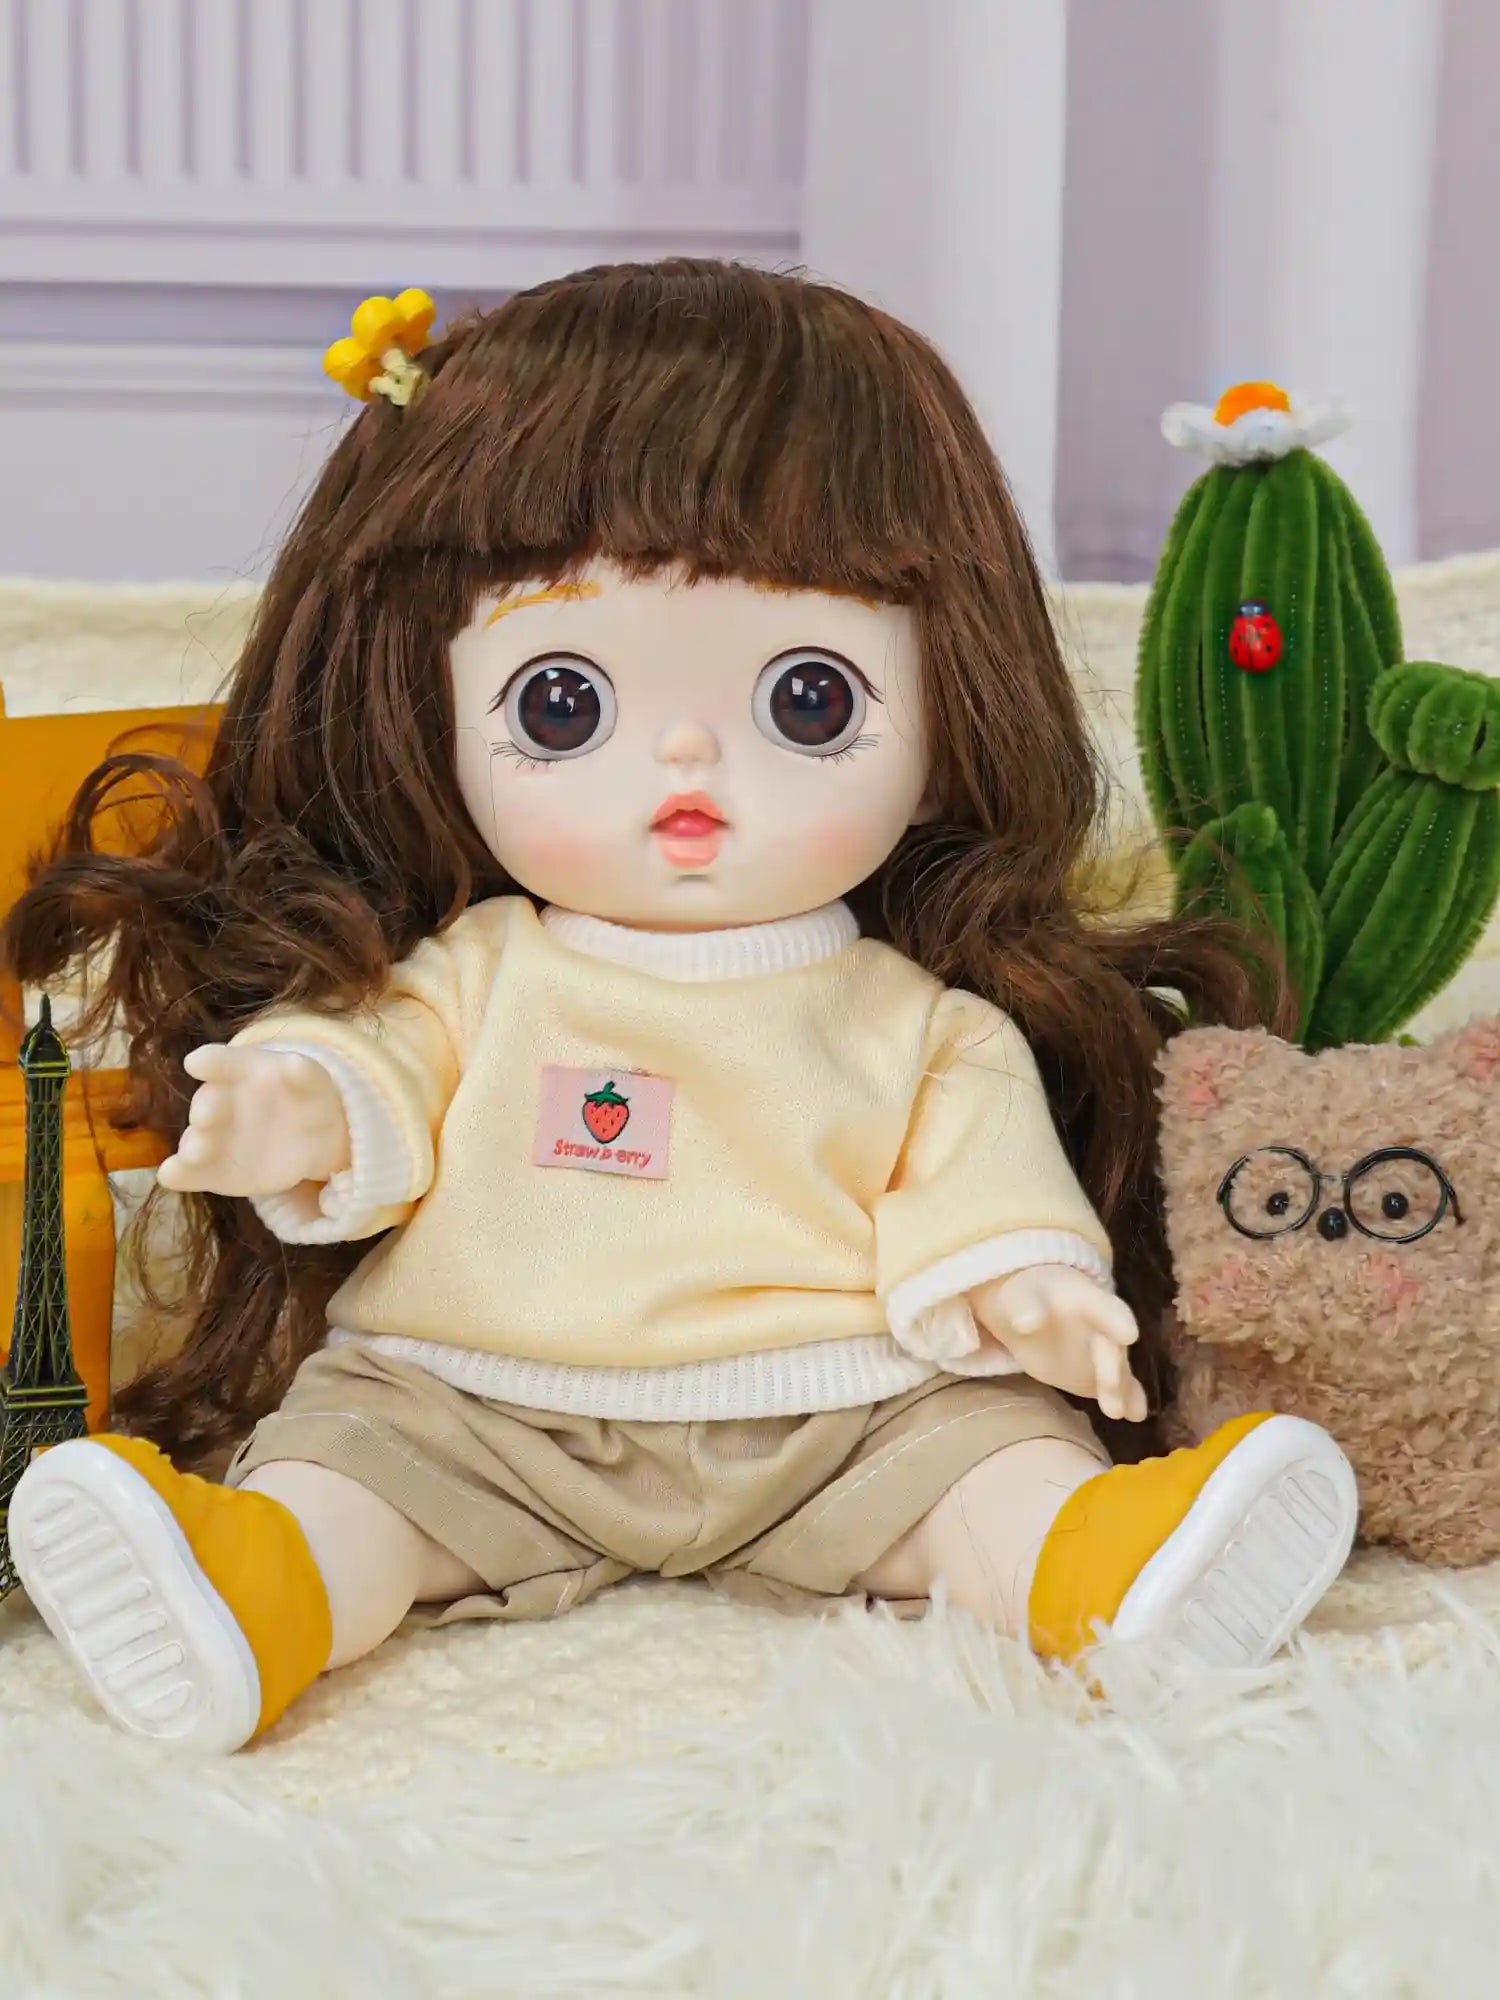 Doll with a soft, pastel-themed outfit and an animated expression, alongside a cute, bespectacled plush toy.